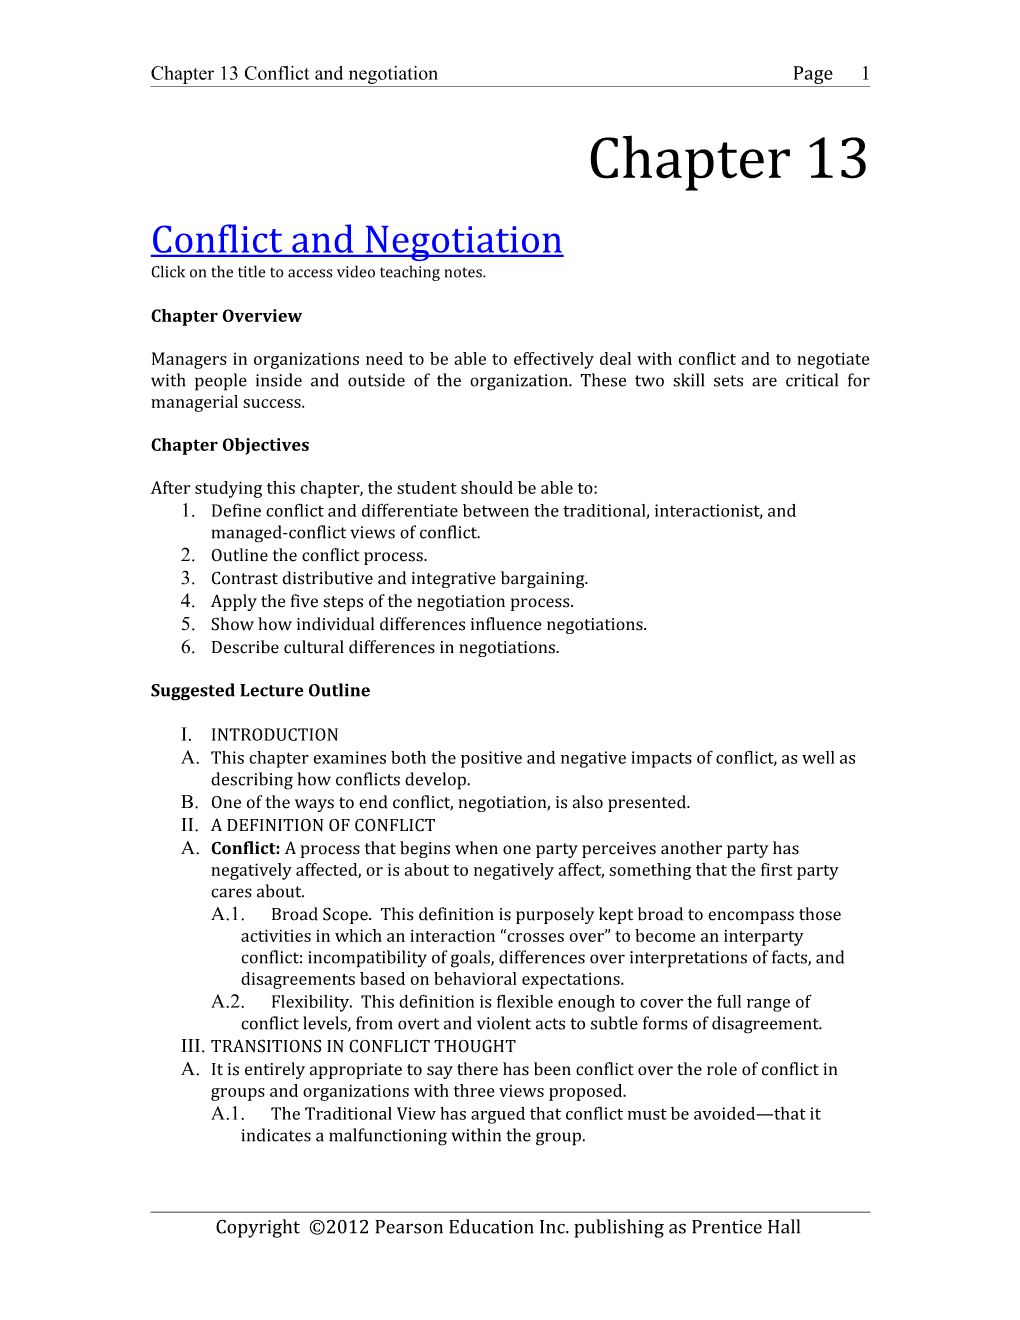 13: Conflict and Negotiation